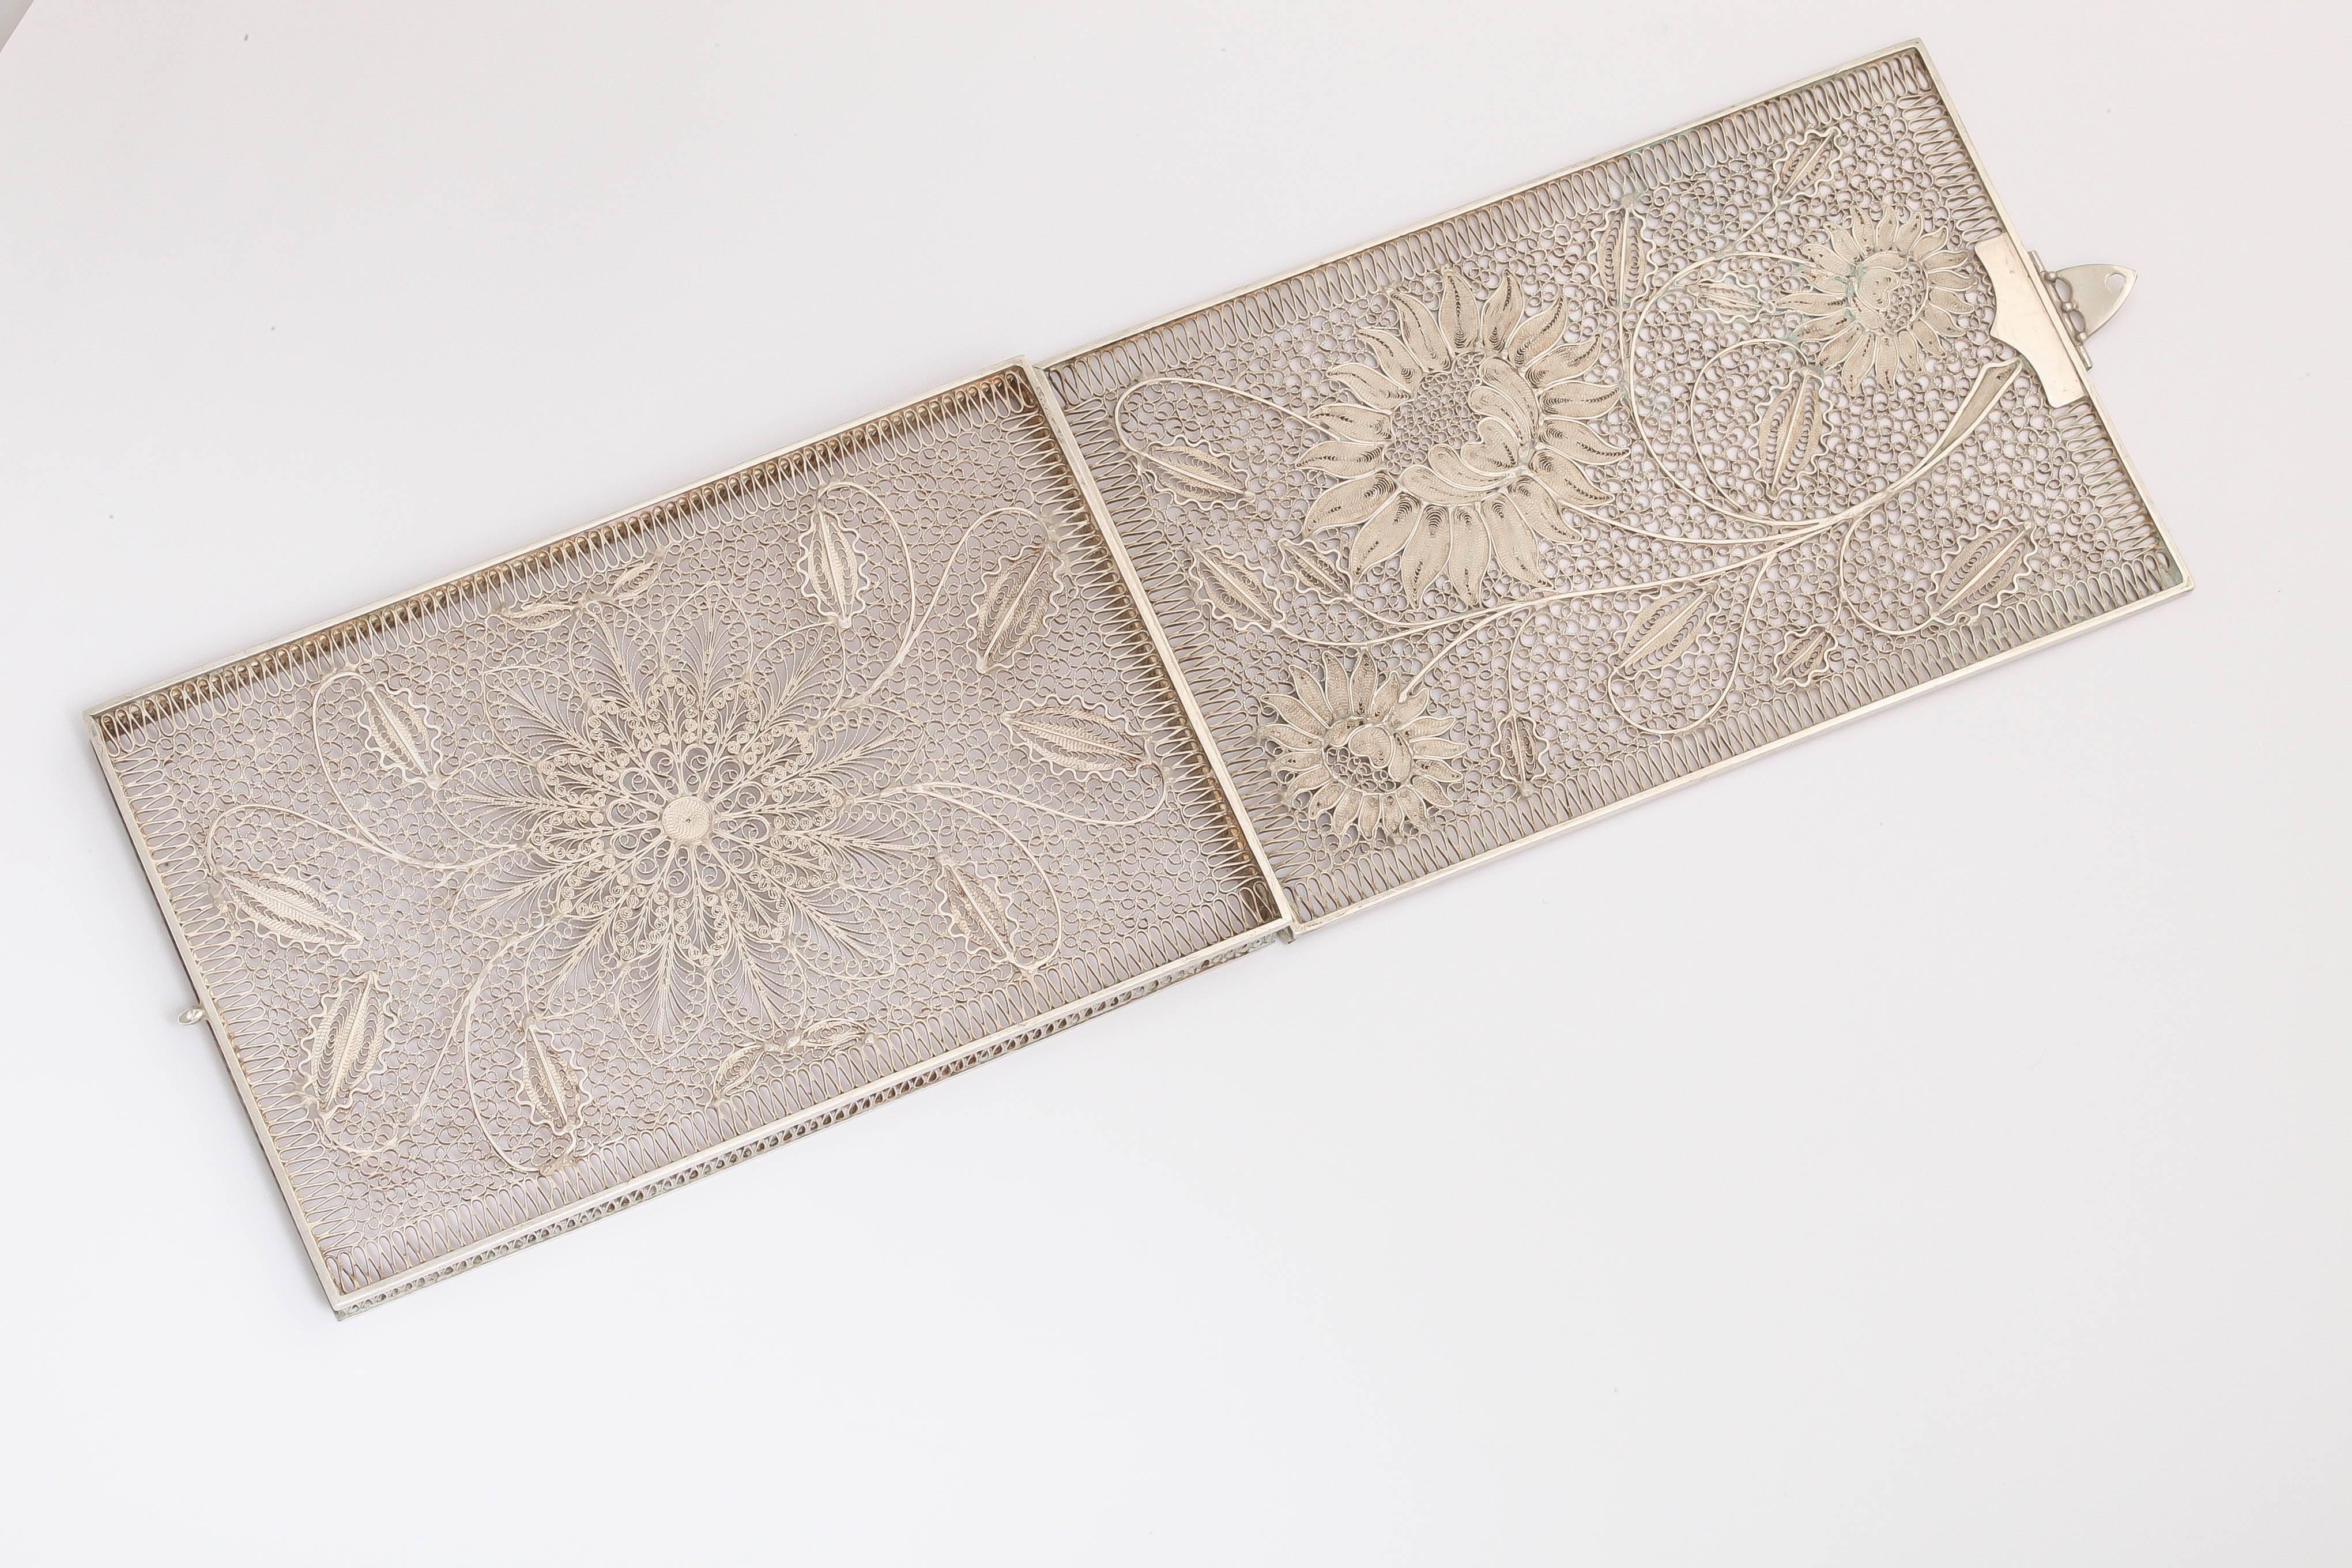 A delicate floral sterling silver card case with clasp.